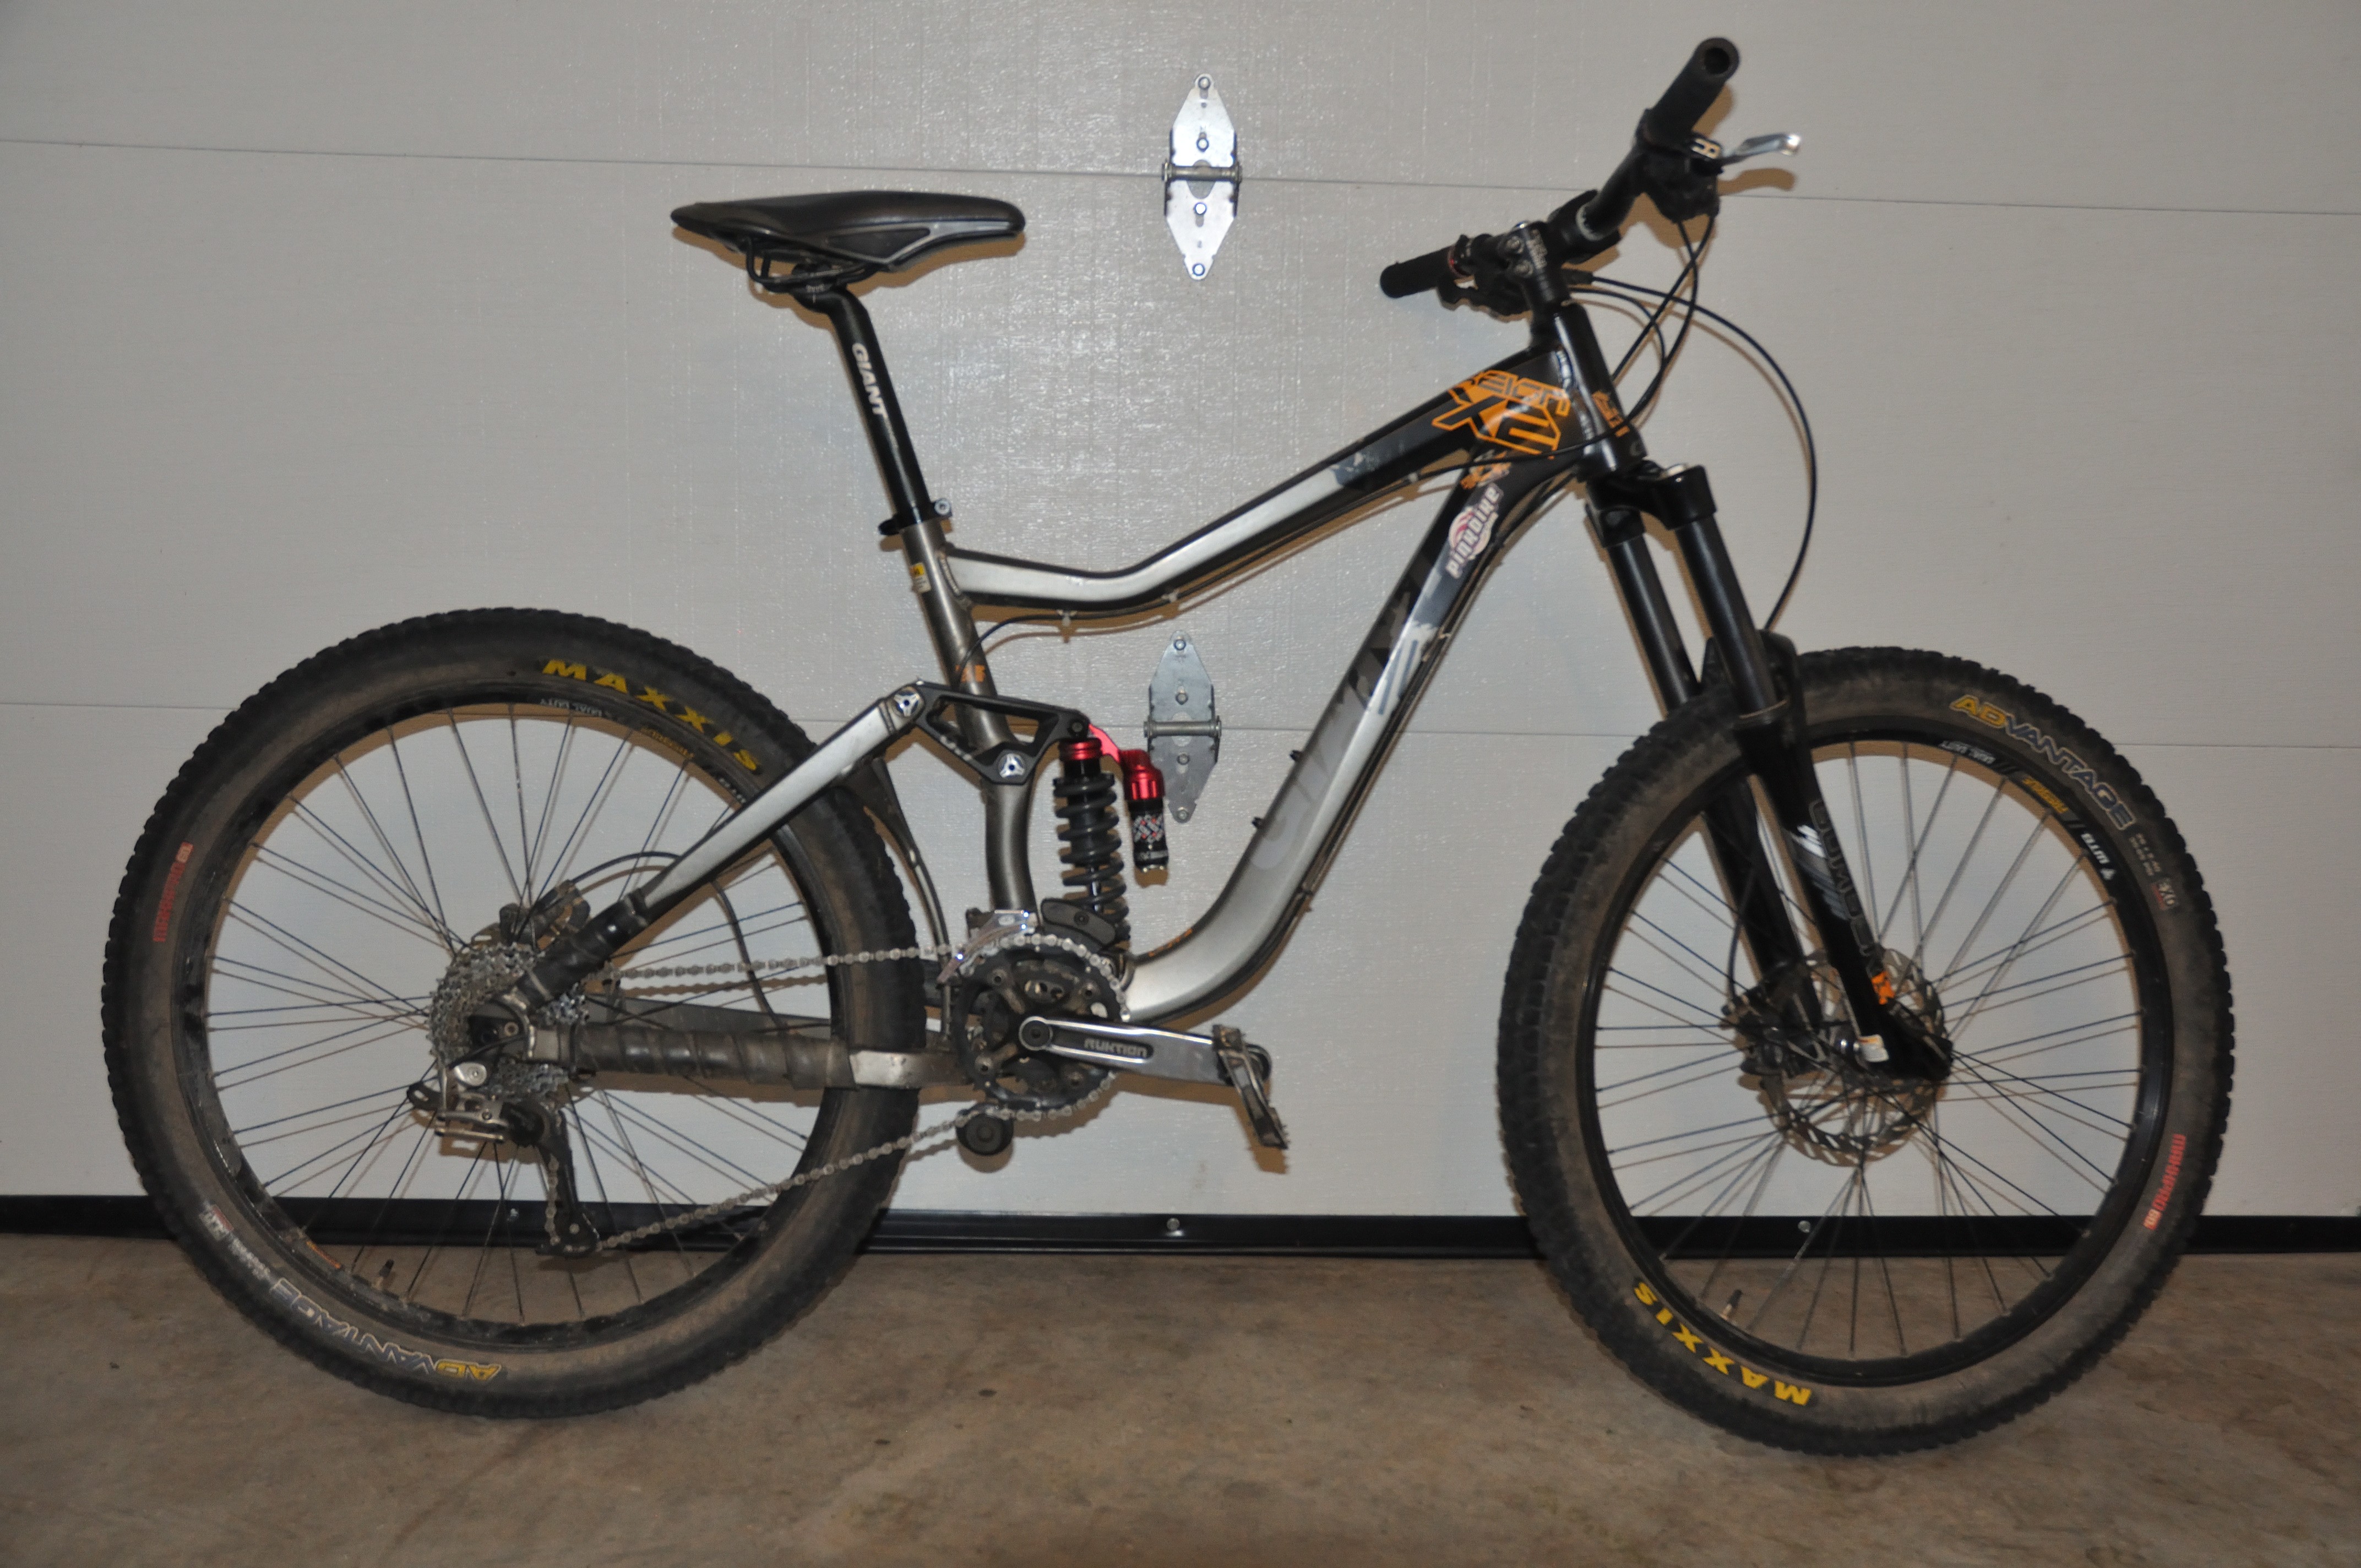 FS: 2010 Giant Reign X2 (New Price) - Buy Sell Trade - ECMTB